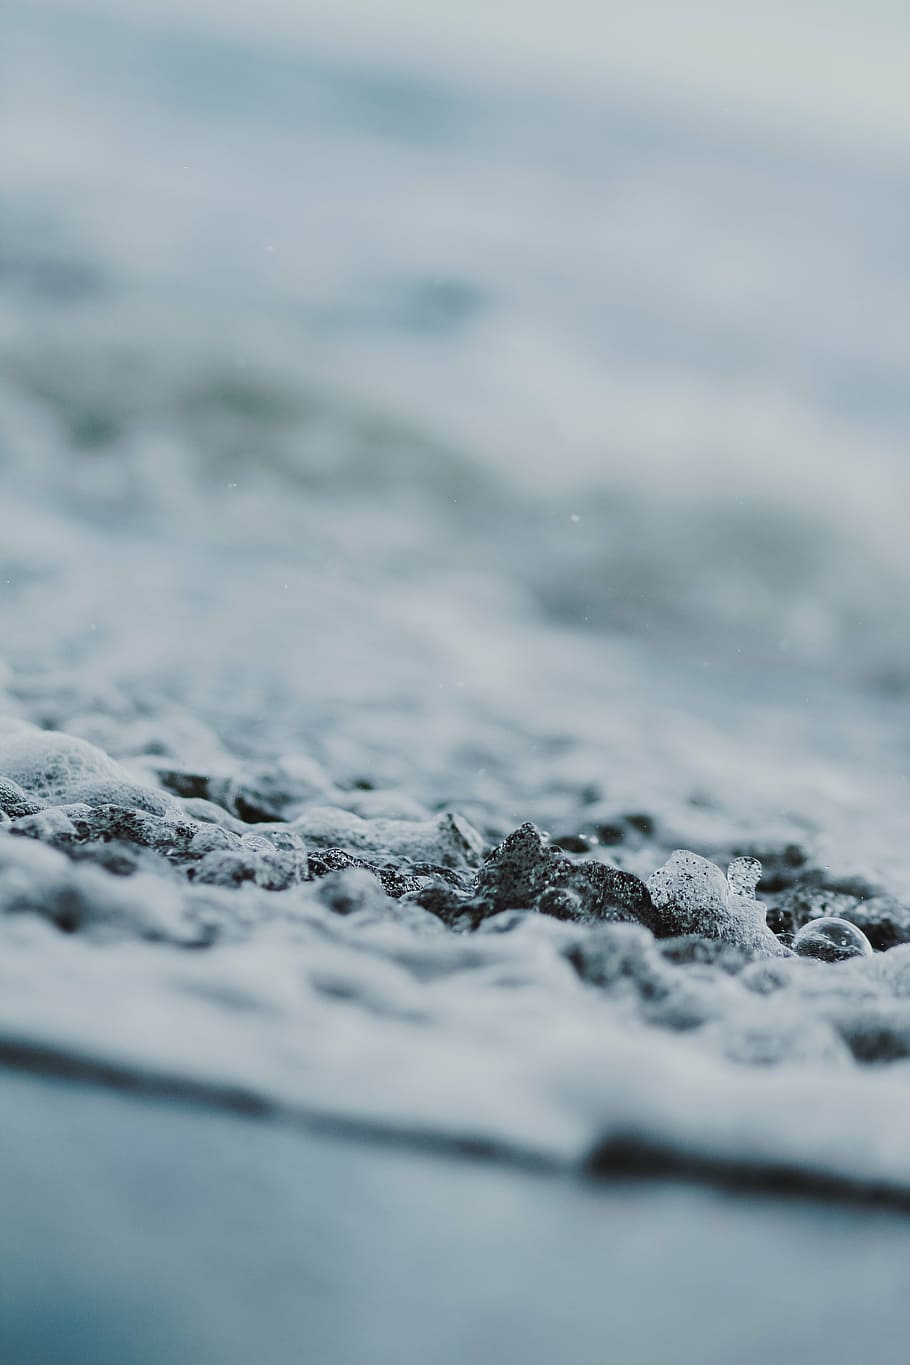 untitled, sea, ocean, water, waves, nature, blur, snow, winter, backgrounds